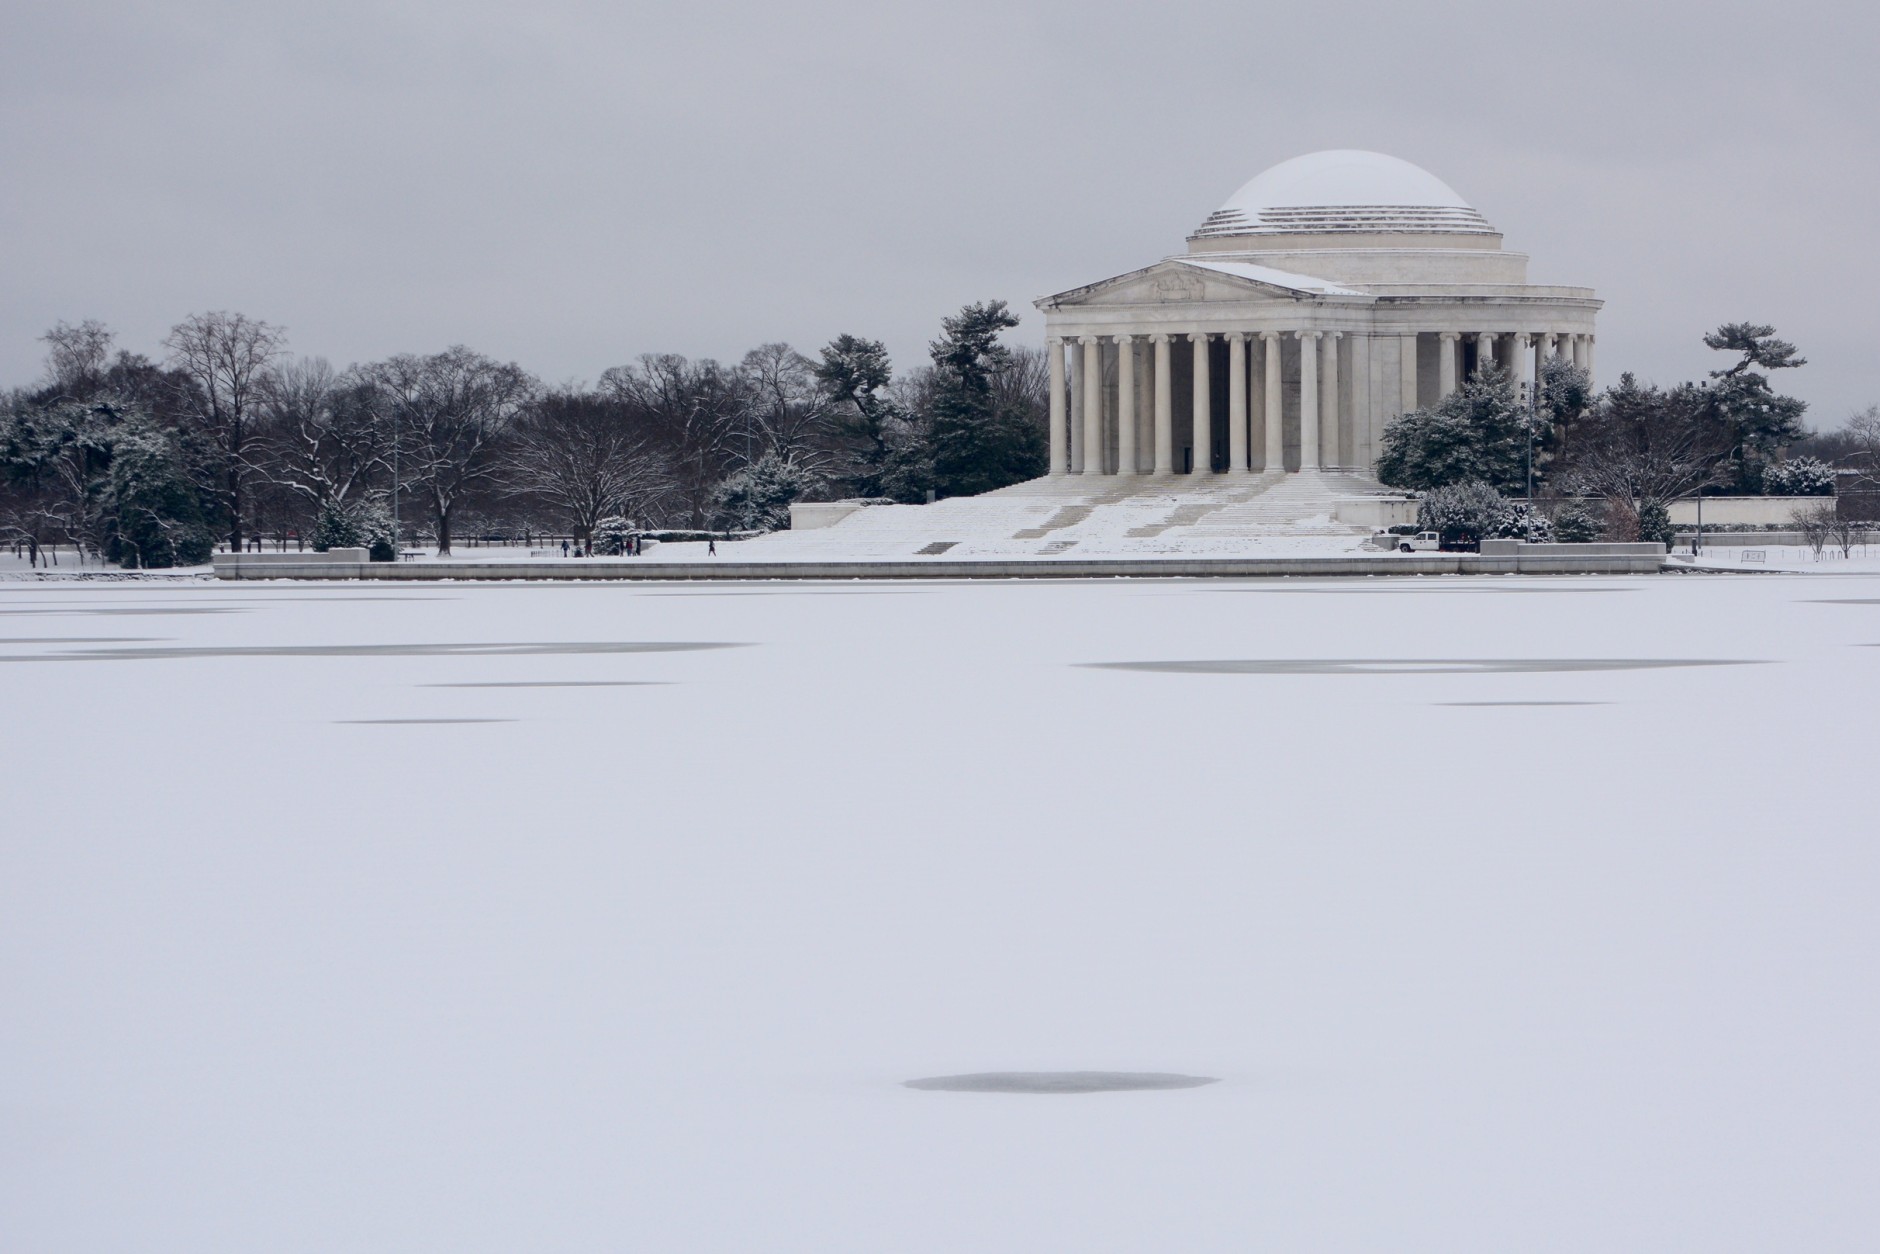 A snowy view of the Jefferson Memorial on Monday, Feb. 15, 2016. (WTOP/Dave Dildine)